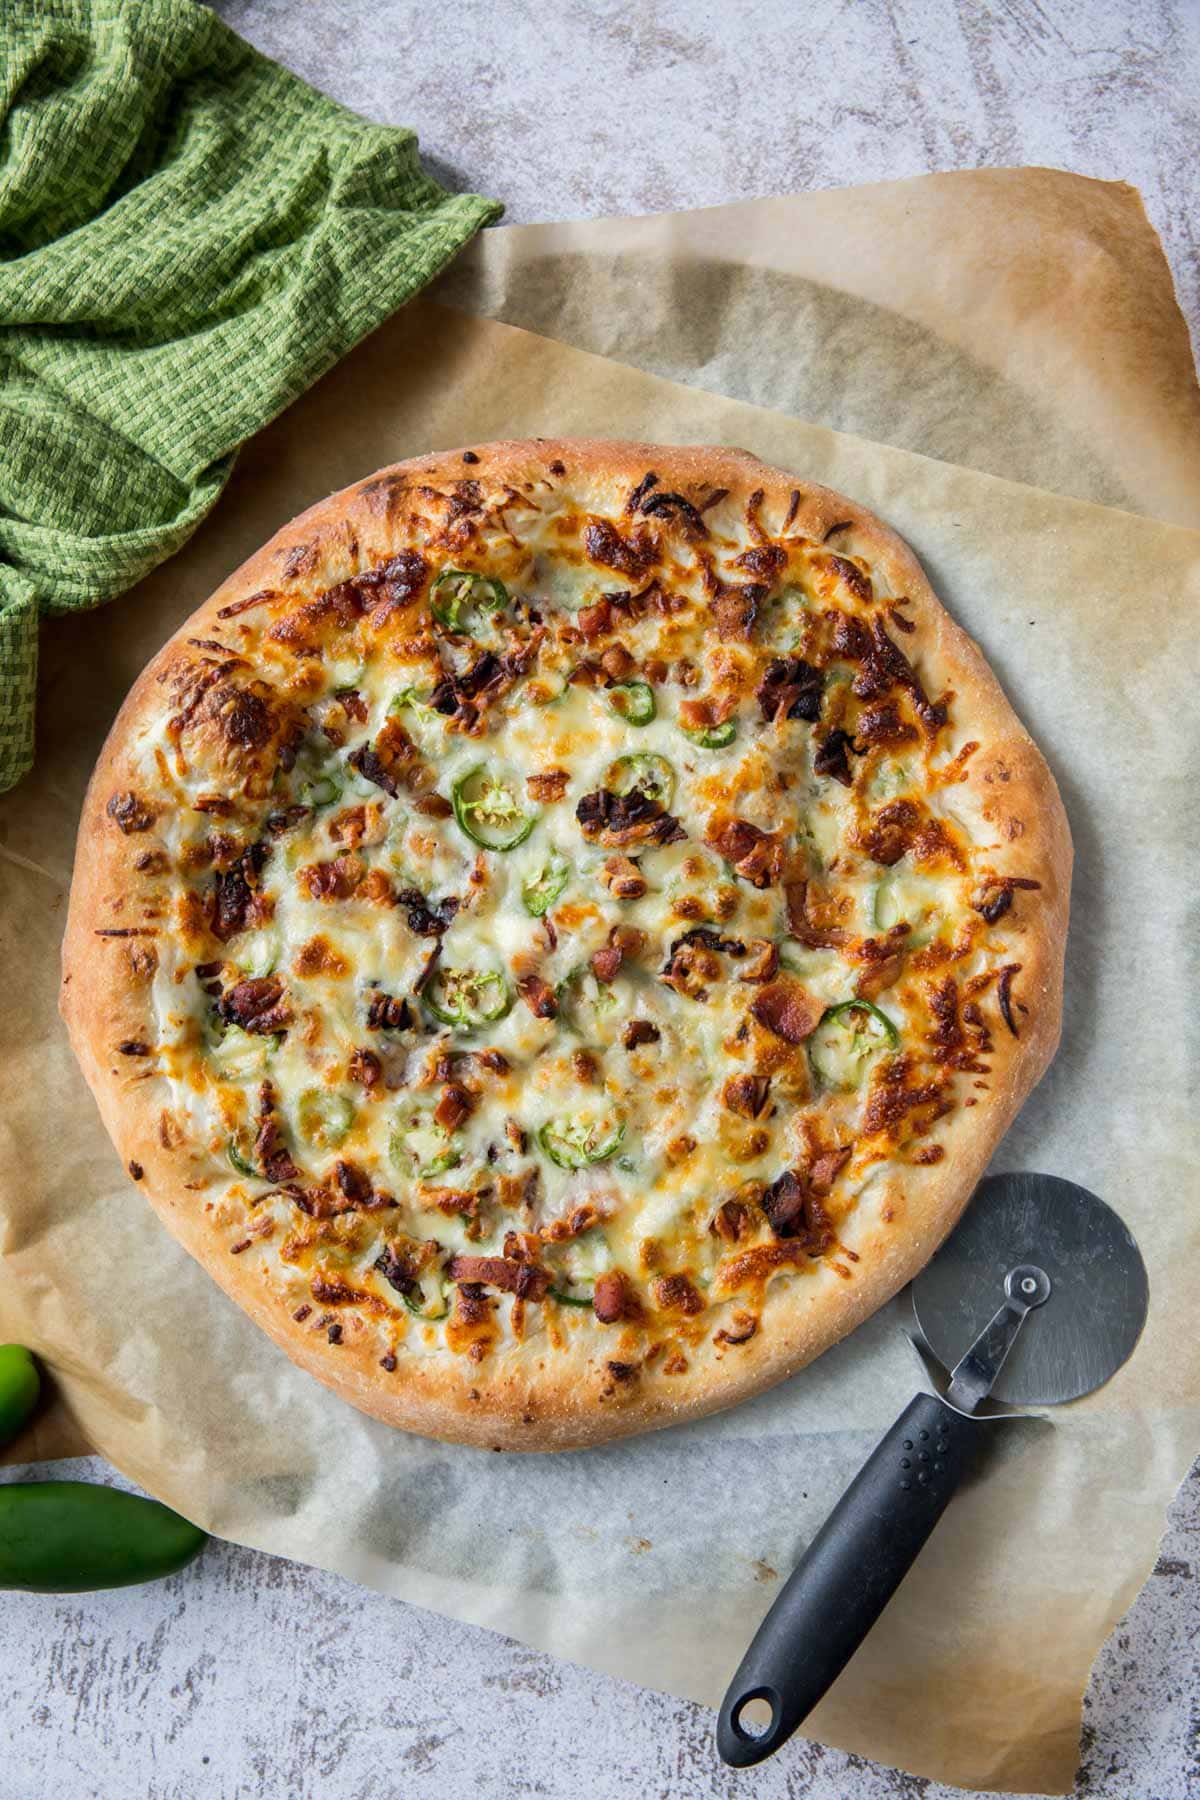 jalapeno pizza, green towel, pizza cutter